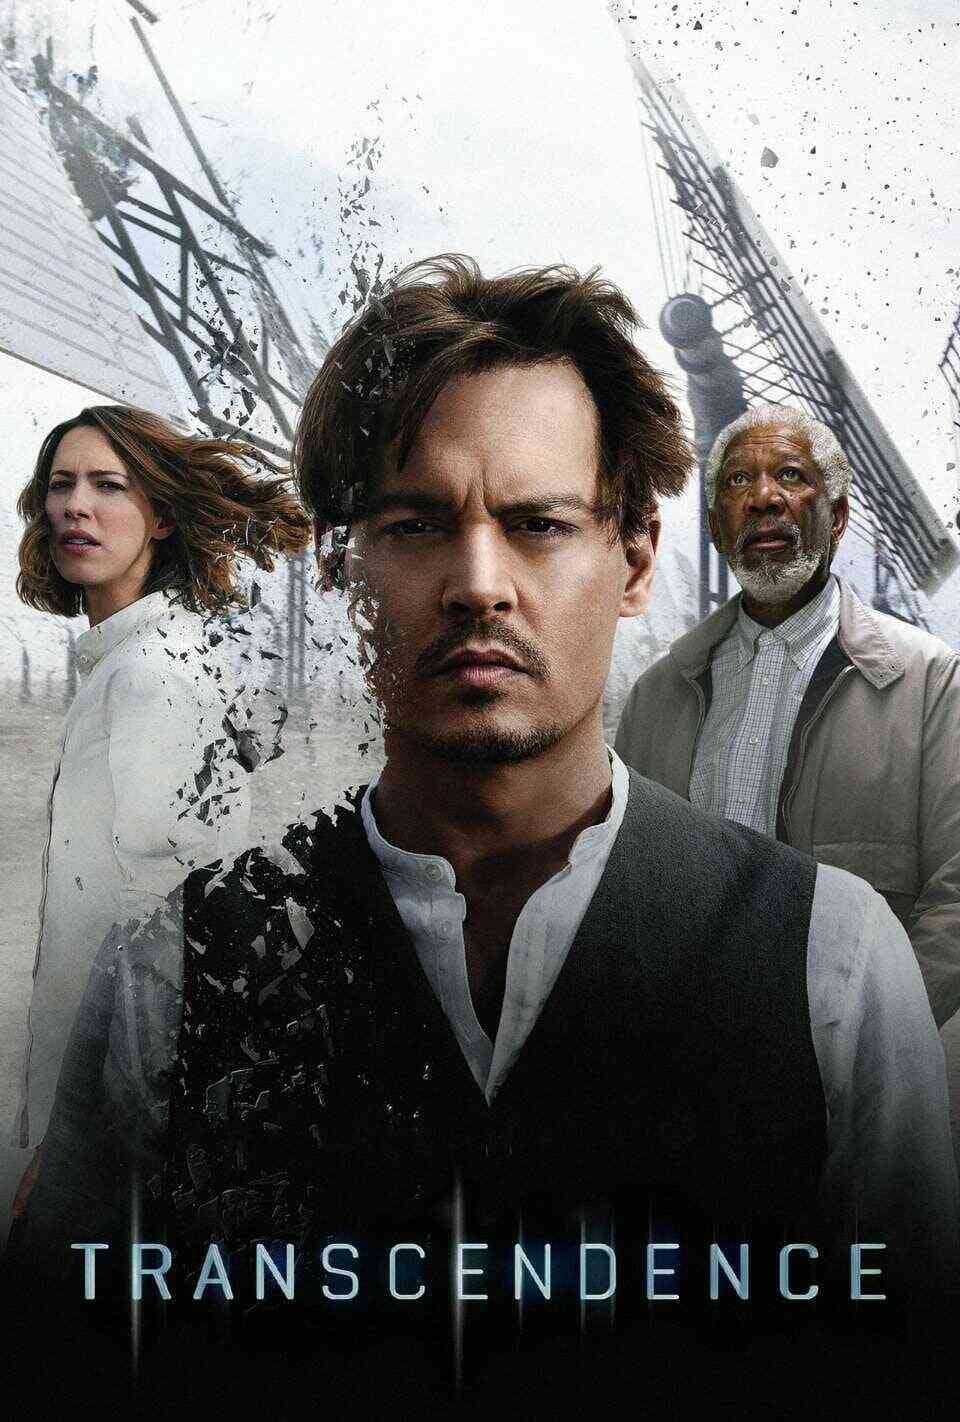 Read Transcendence screenplay (poster)